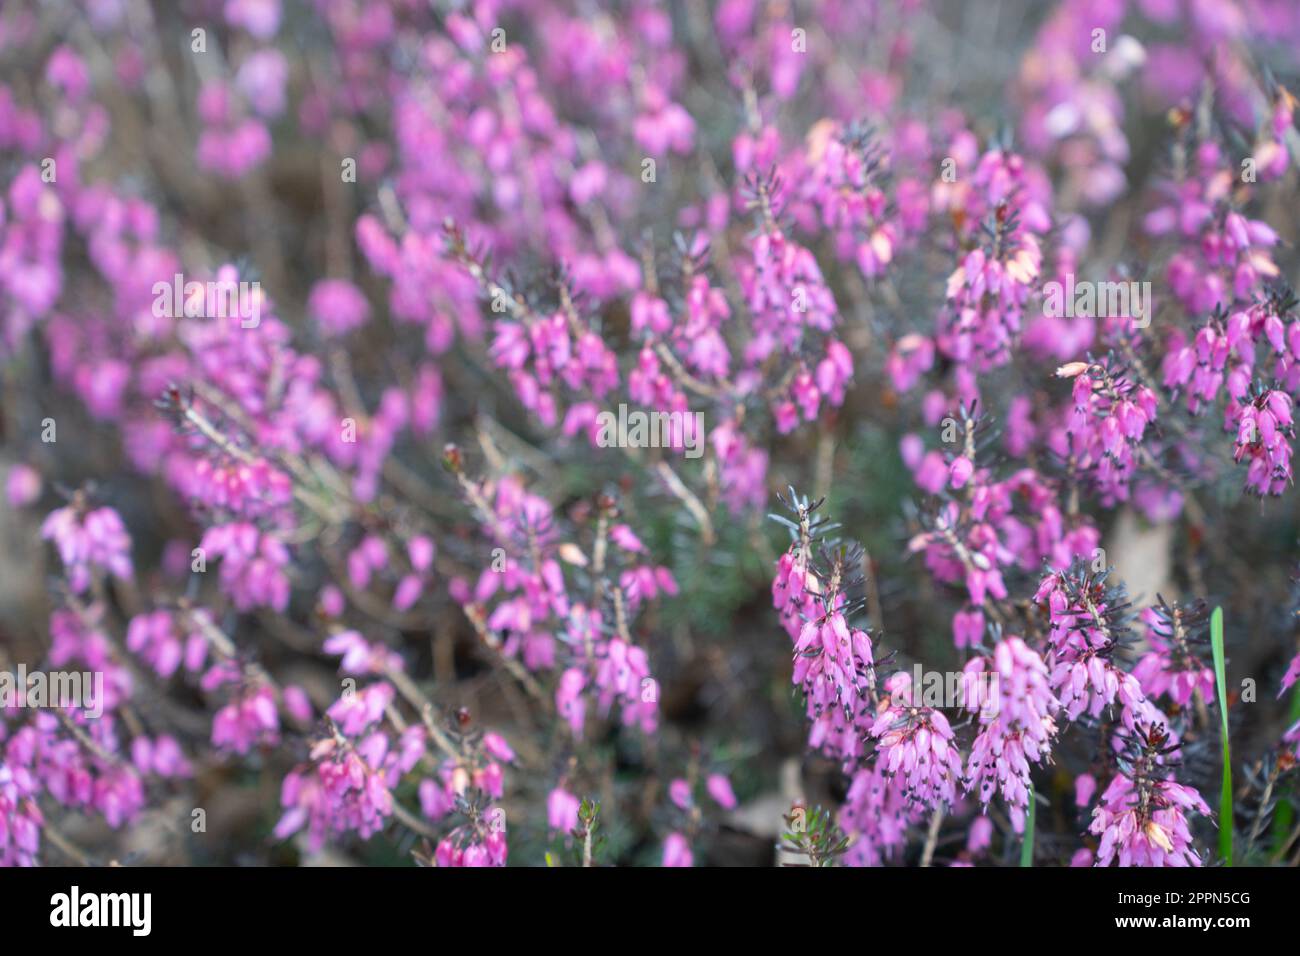 Pink and purple flowers of Calluna vulgaris, common heather, ling, or simply heather close-up. Stock Photo